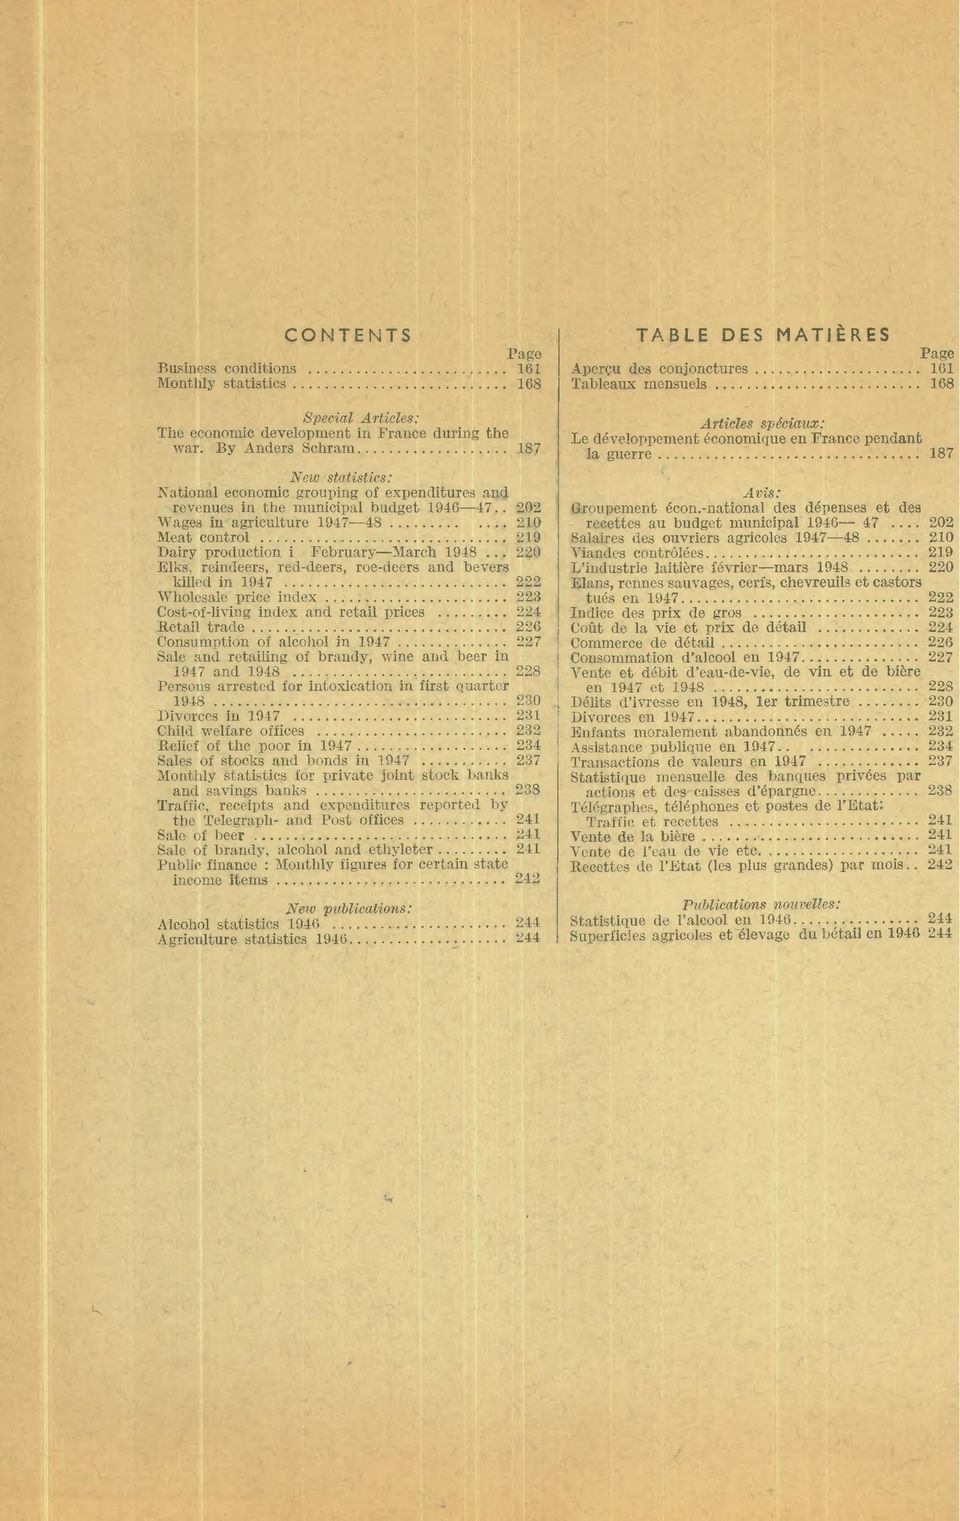 . 202 Wages in agriculture 194748 210 Meat control 219 Dairy production i February March 1948.